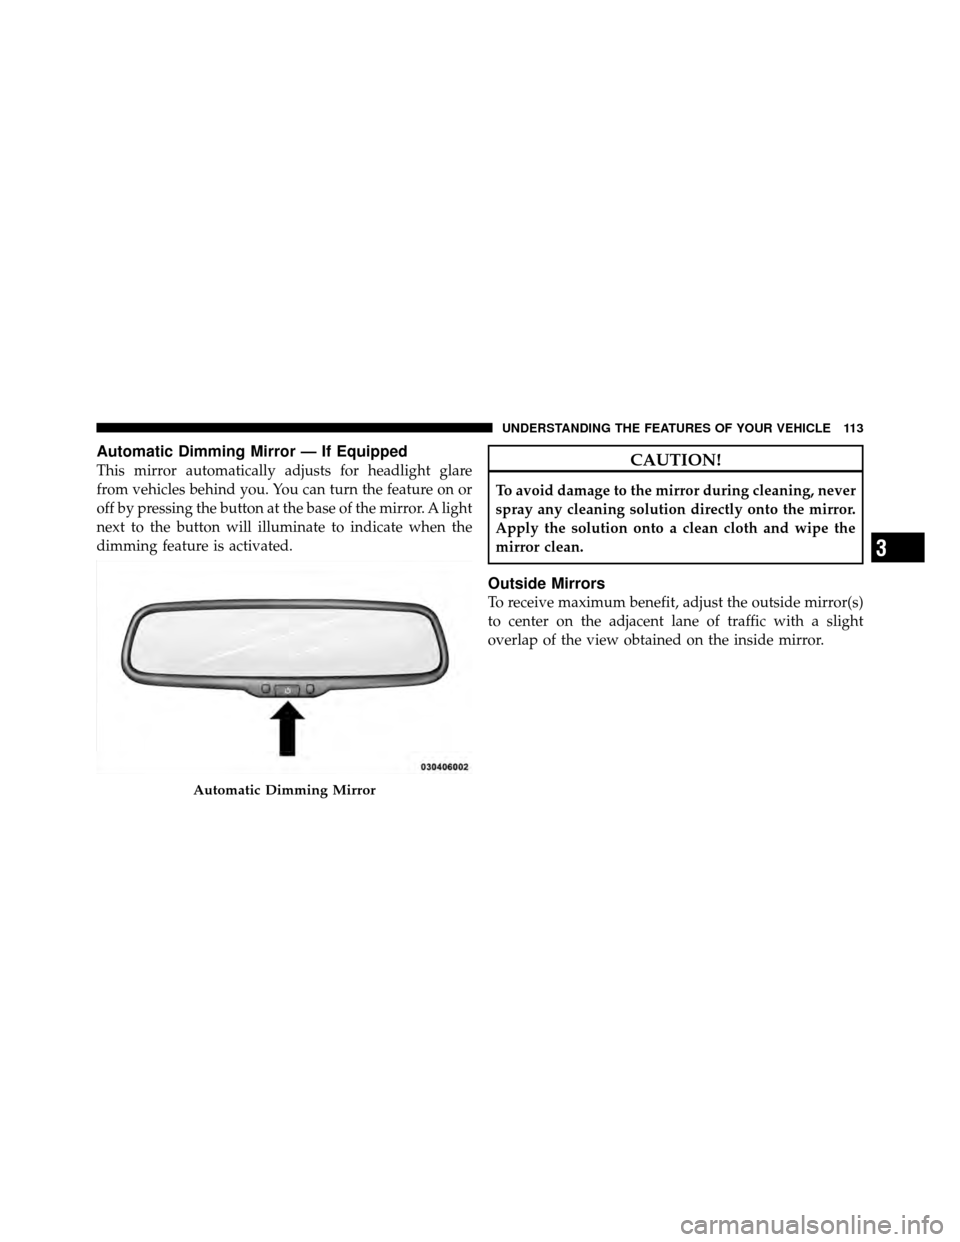 CHRYSLER TOWN AND COUNTRY 2010 5.G Owners Manual Automatic Dimming Mirror — If Equipped
This mirror automatically adjusts for headlight glare
from vehicles behind you. You can turn the feature on or
off by pressing the button at the base of the mi